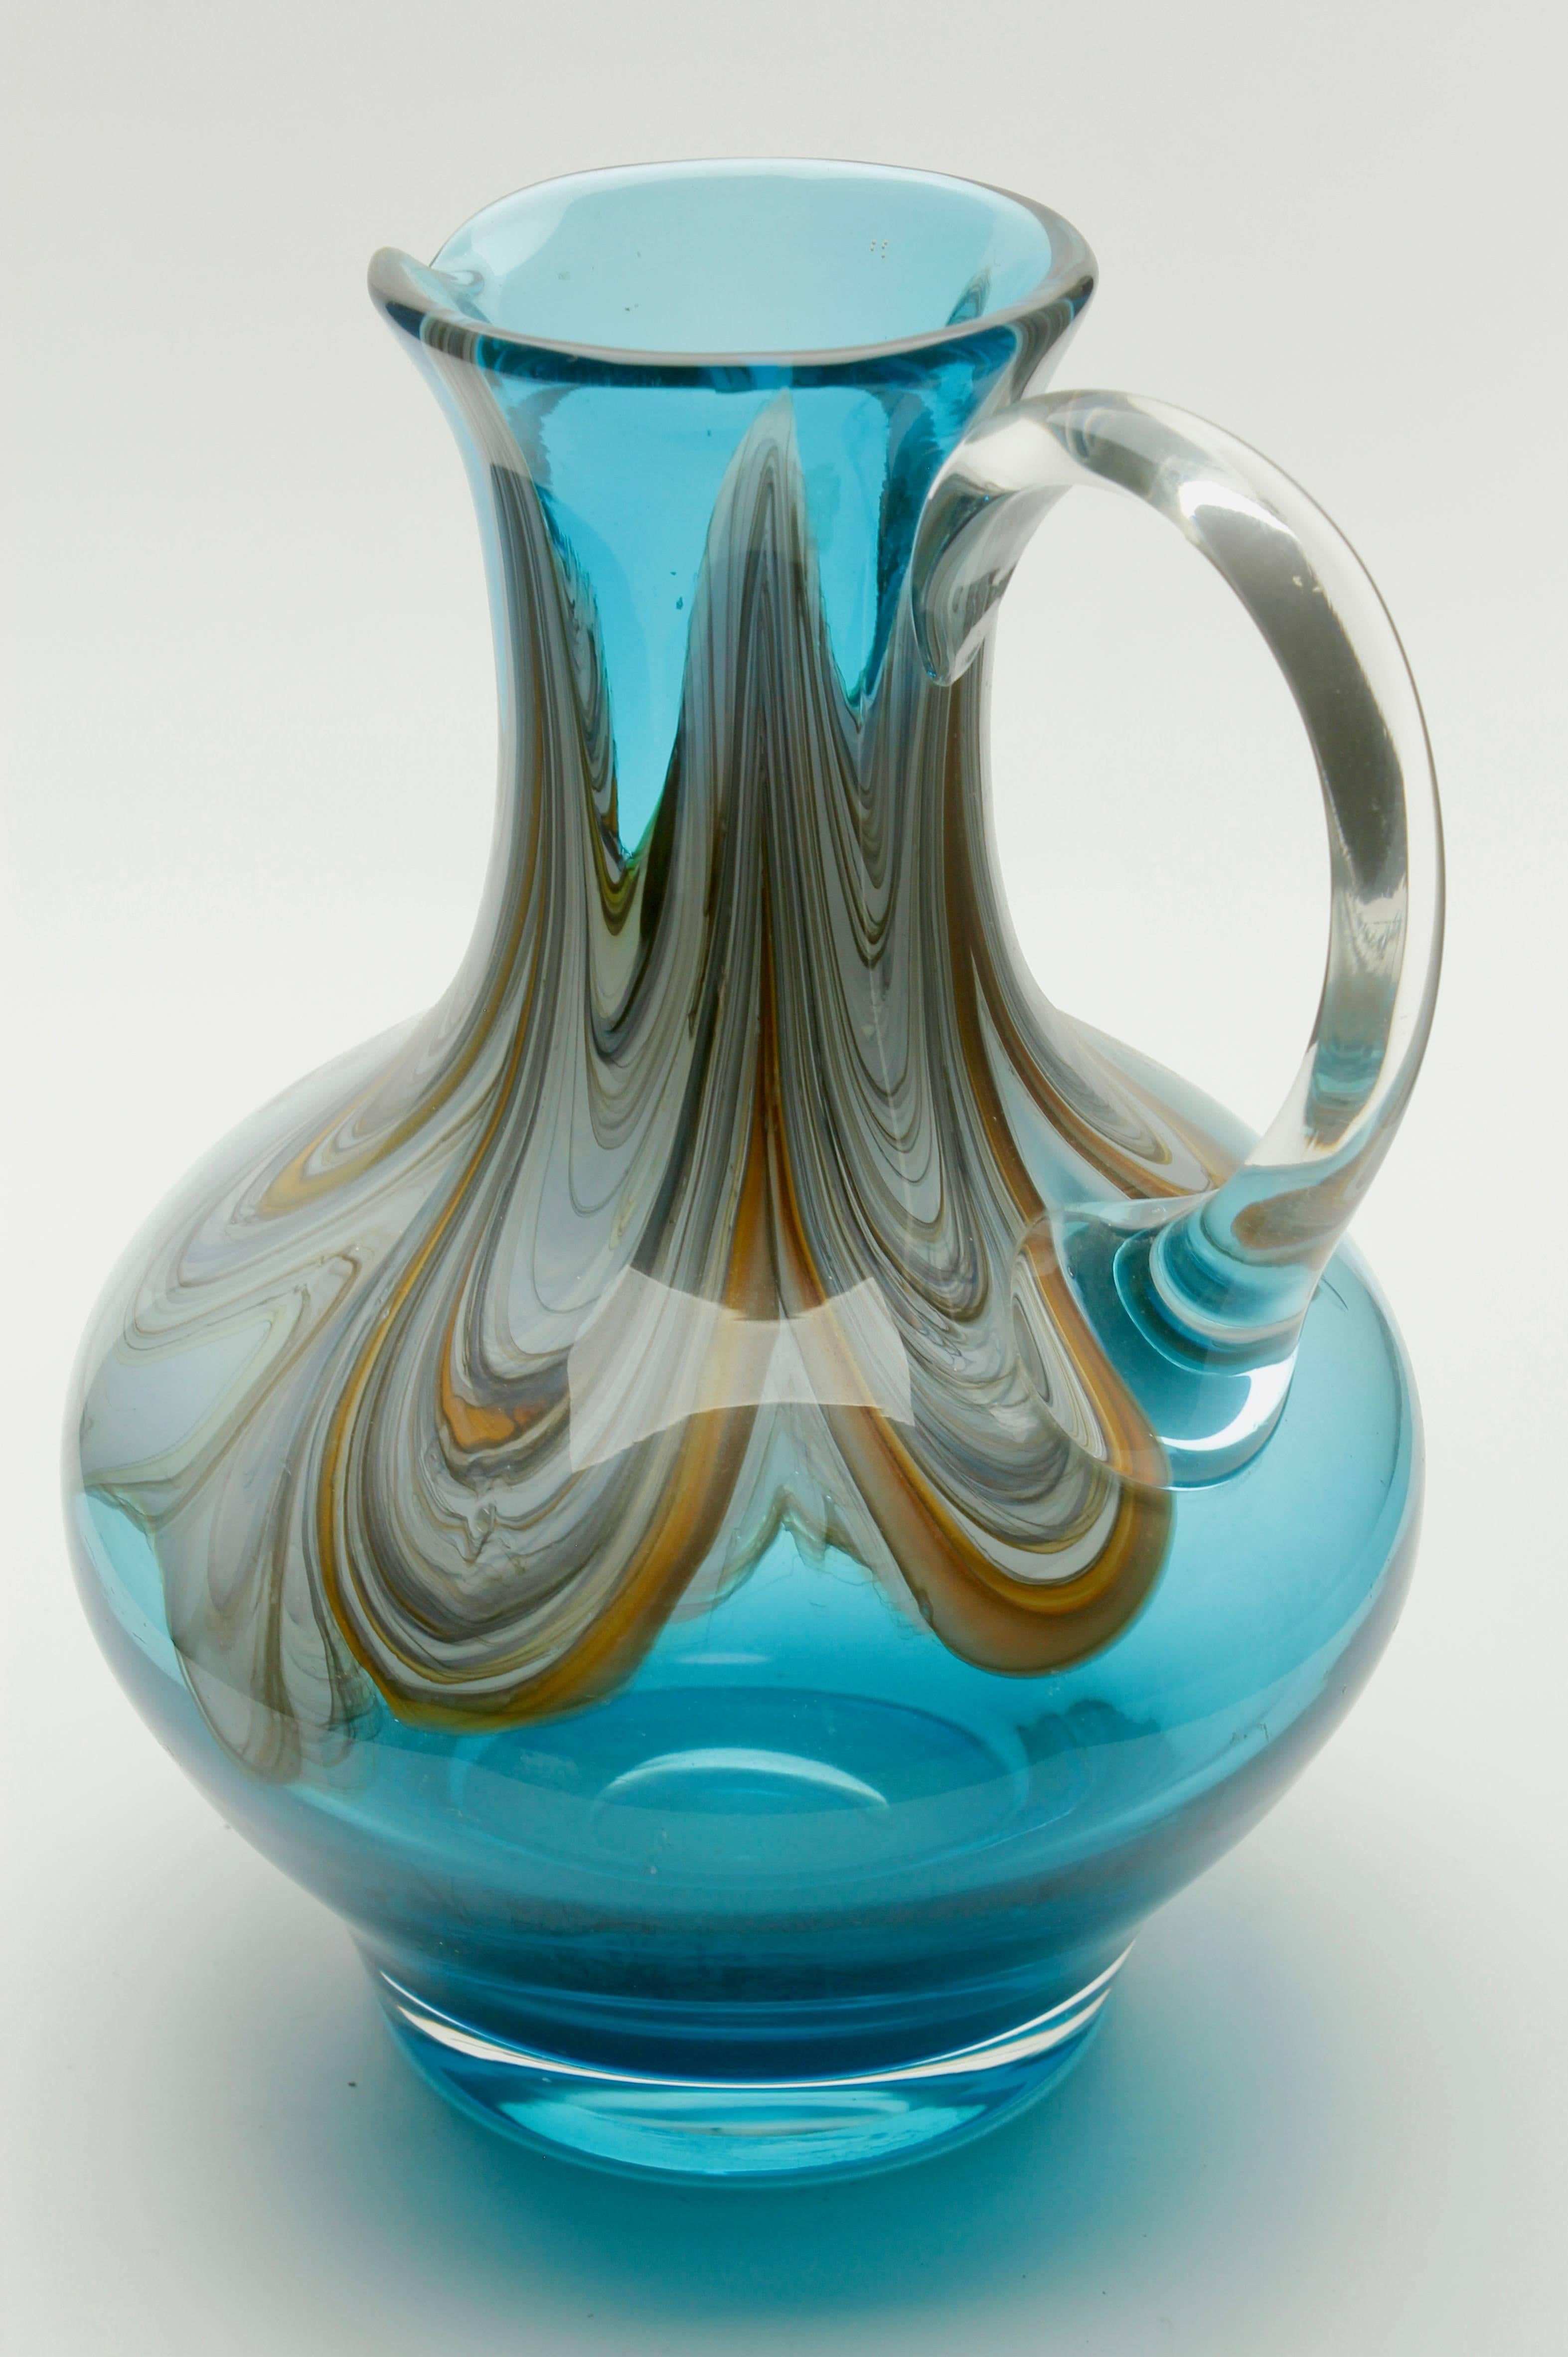 Beautiful hand blown art glass pitcher with agate-colored swirls.
A fantastic mingling of contemporary and classical designs. Excellent condition!

This is a rare color and size, a must-have for any collector.
Looks simply